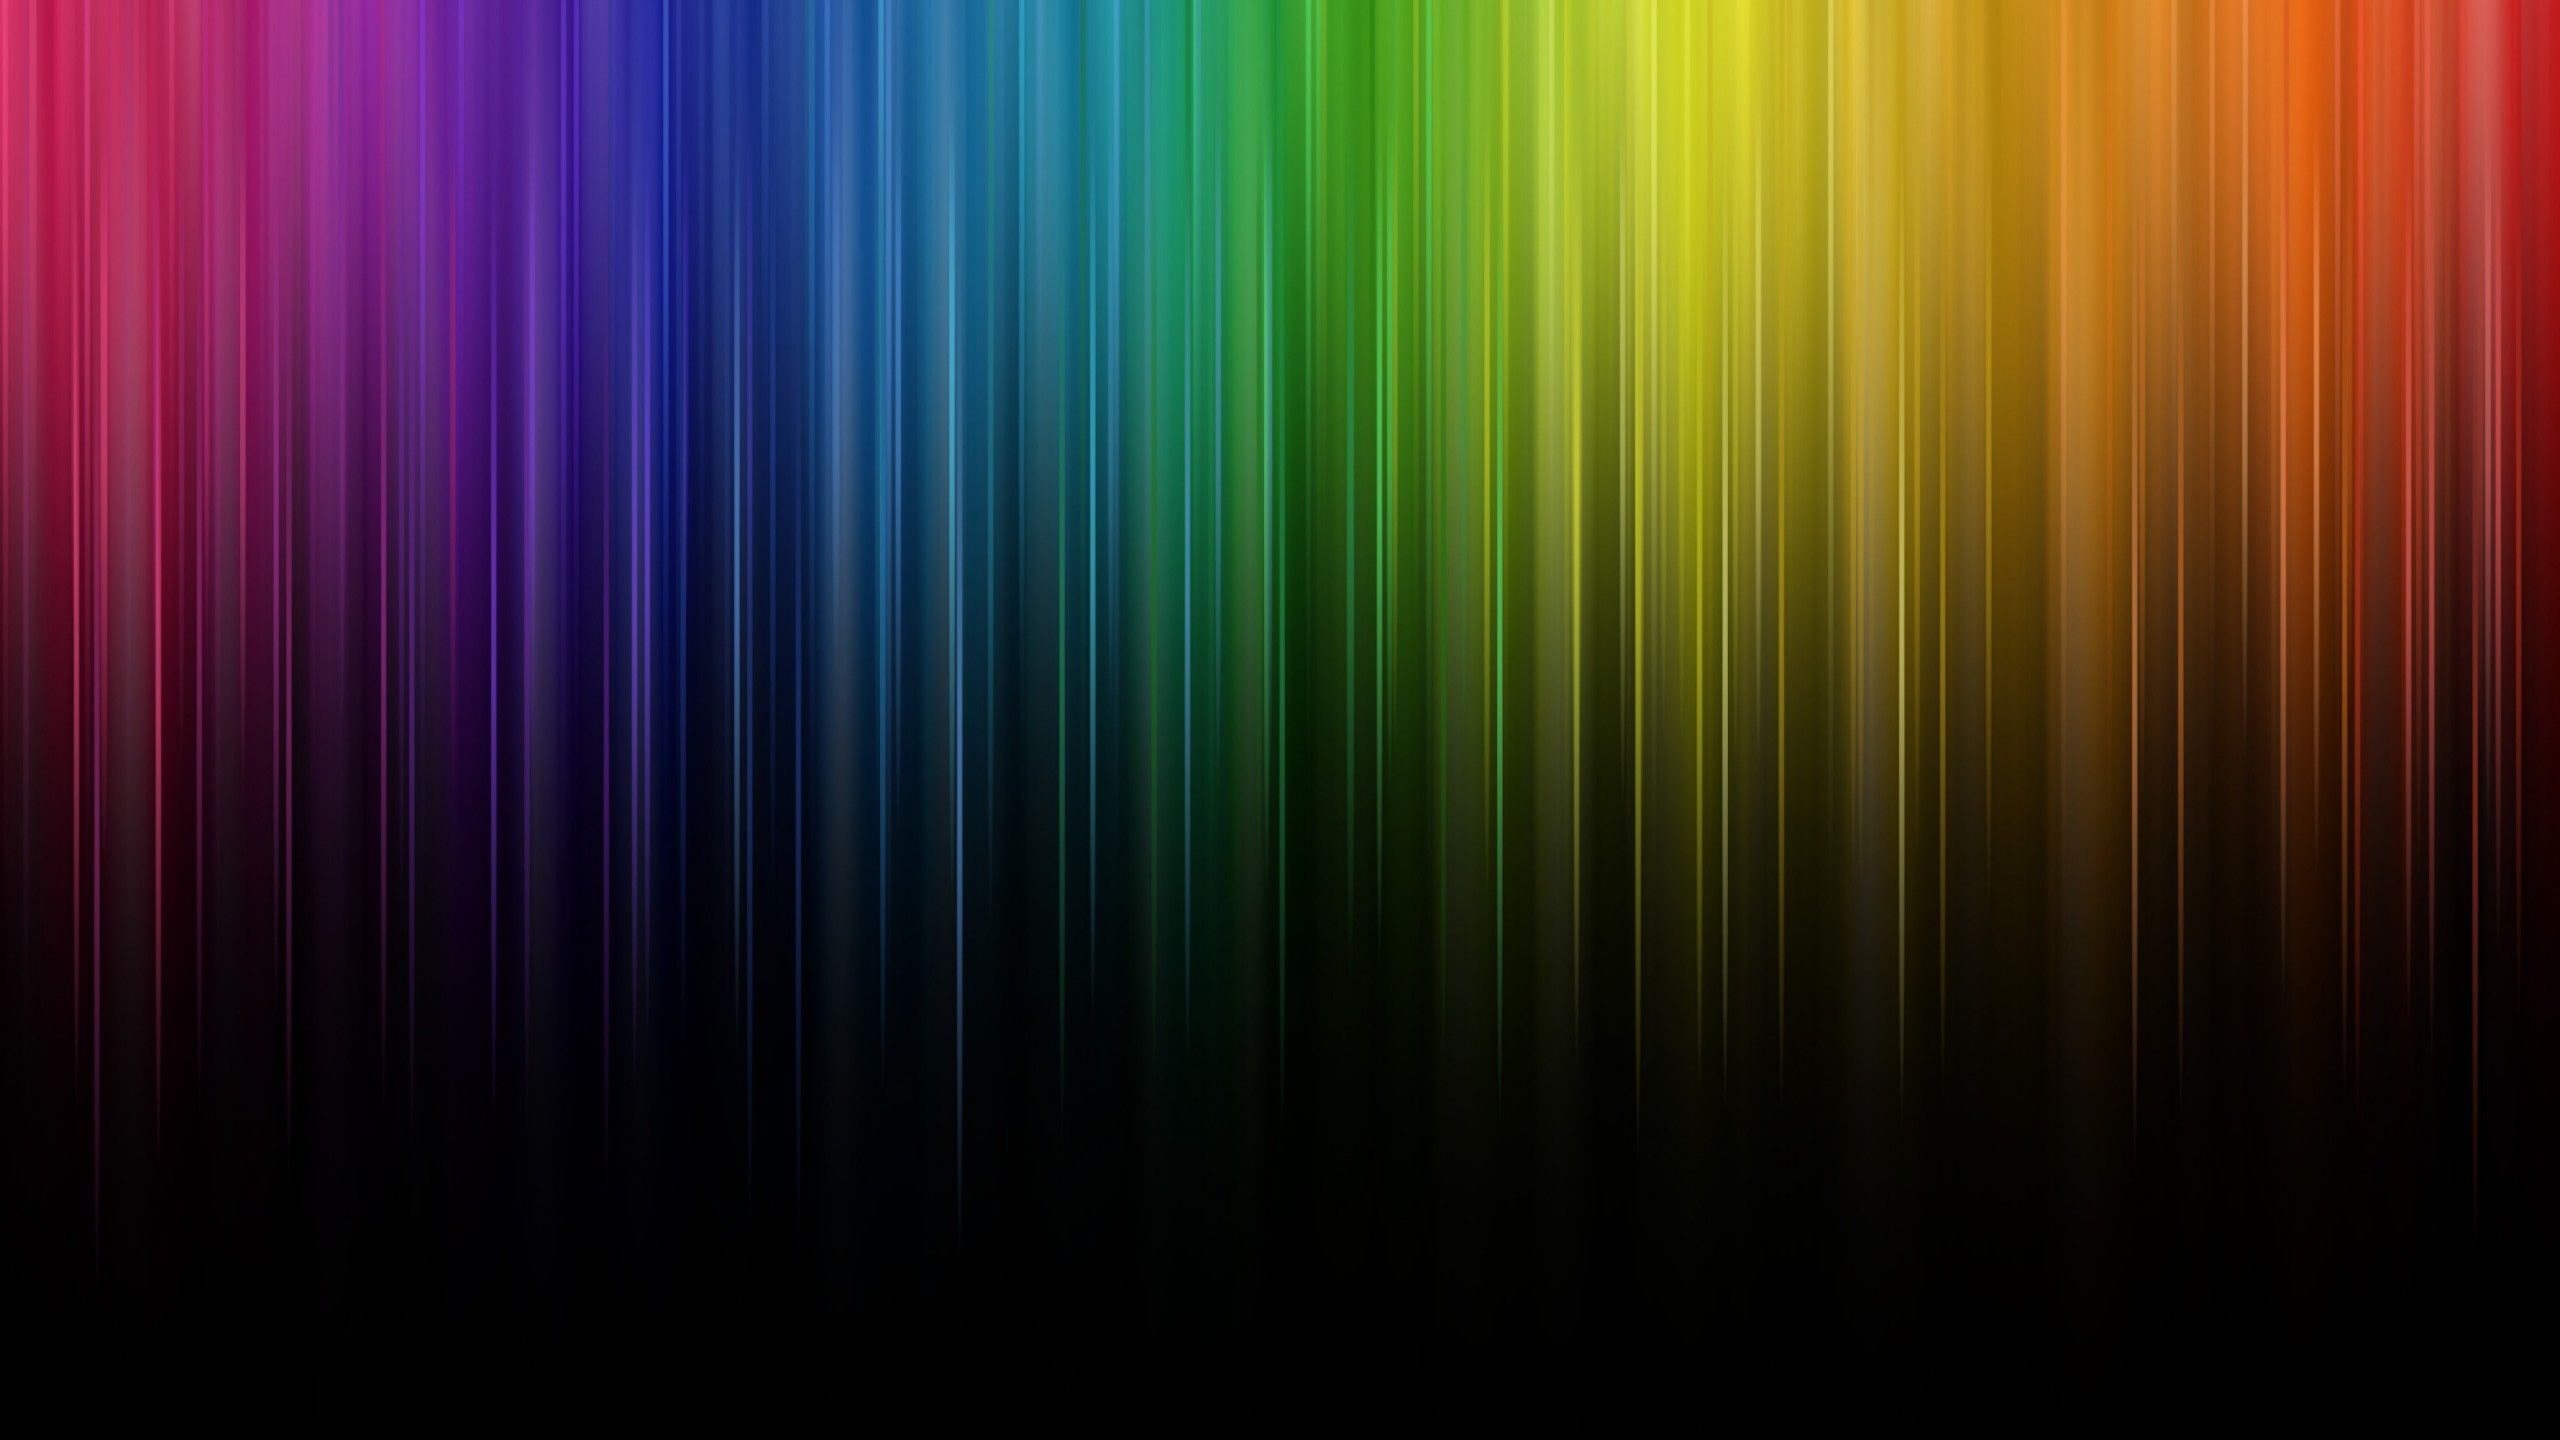 Spectrum 4K Wallpaper, Rainbow colors, Colorful, Multicolor, Abstract